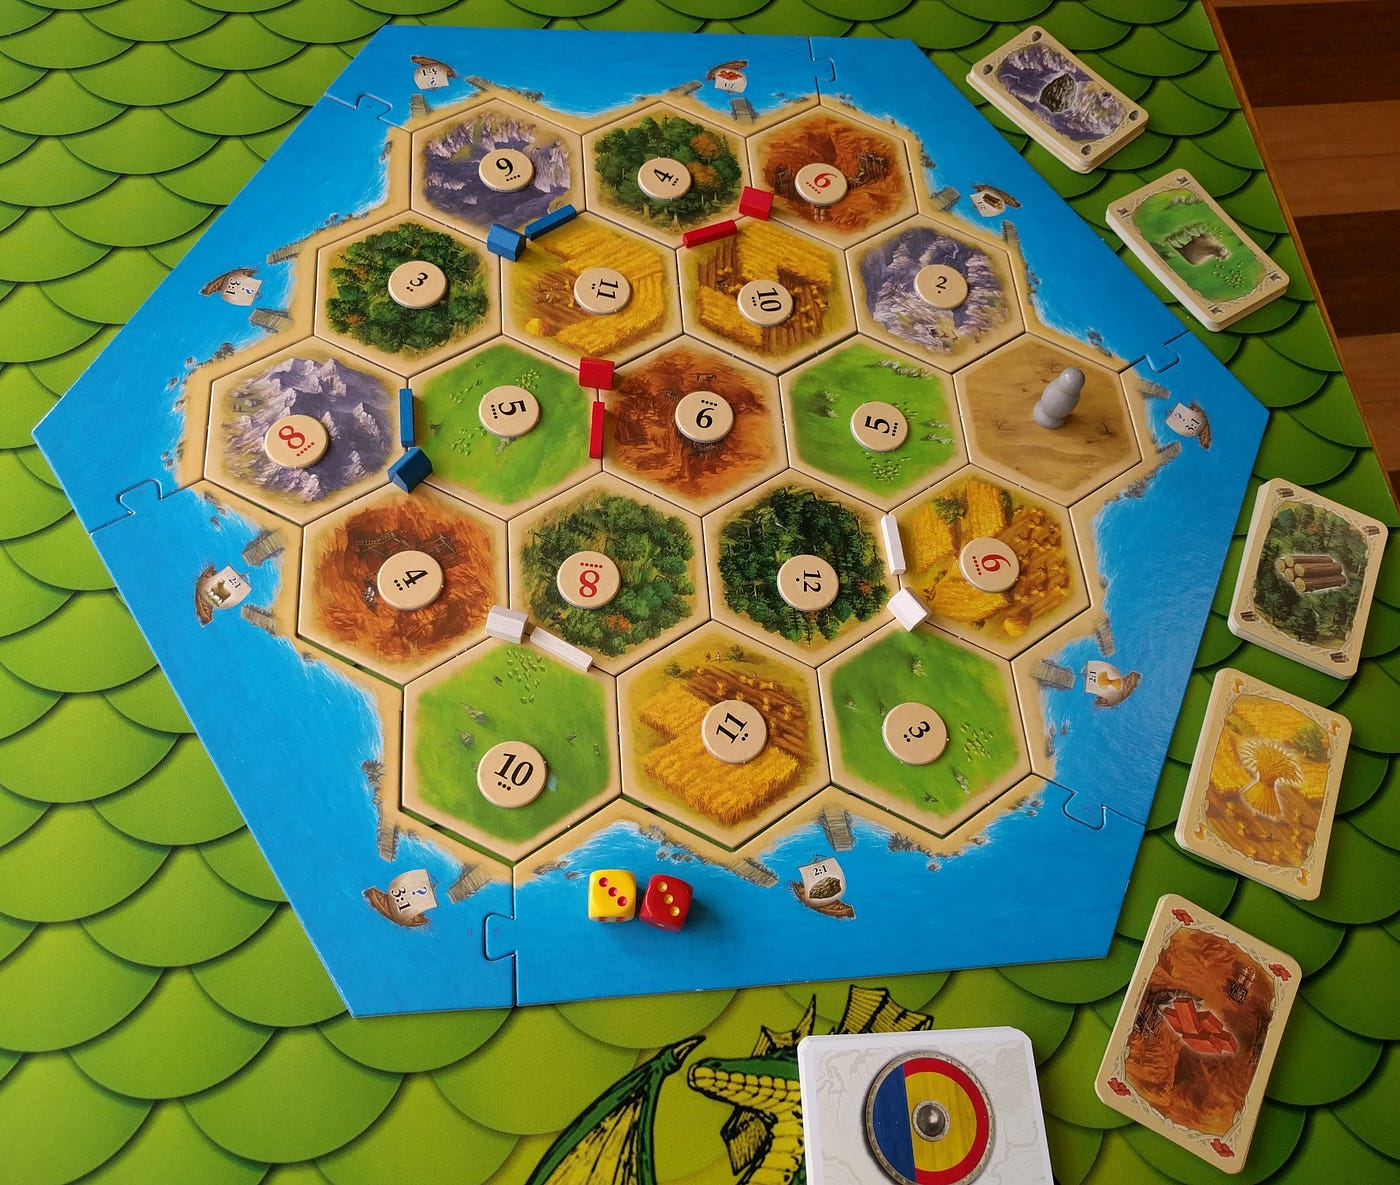 How to play Catan: board game's rules, setup and how to win